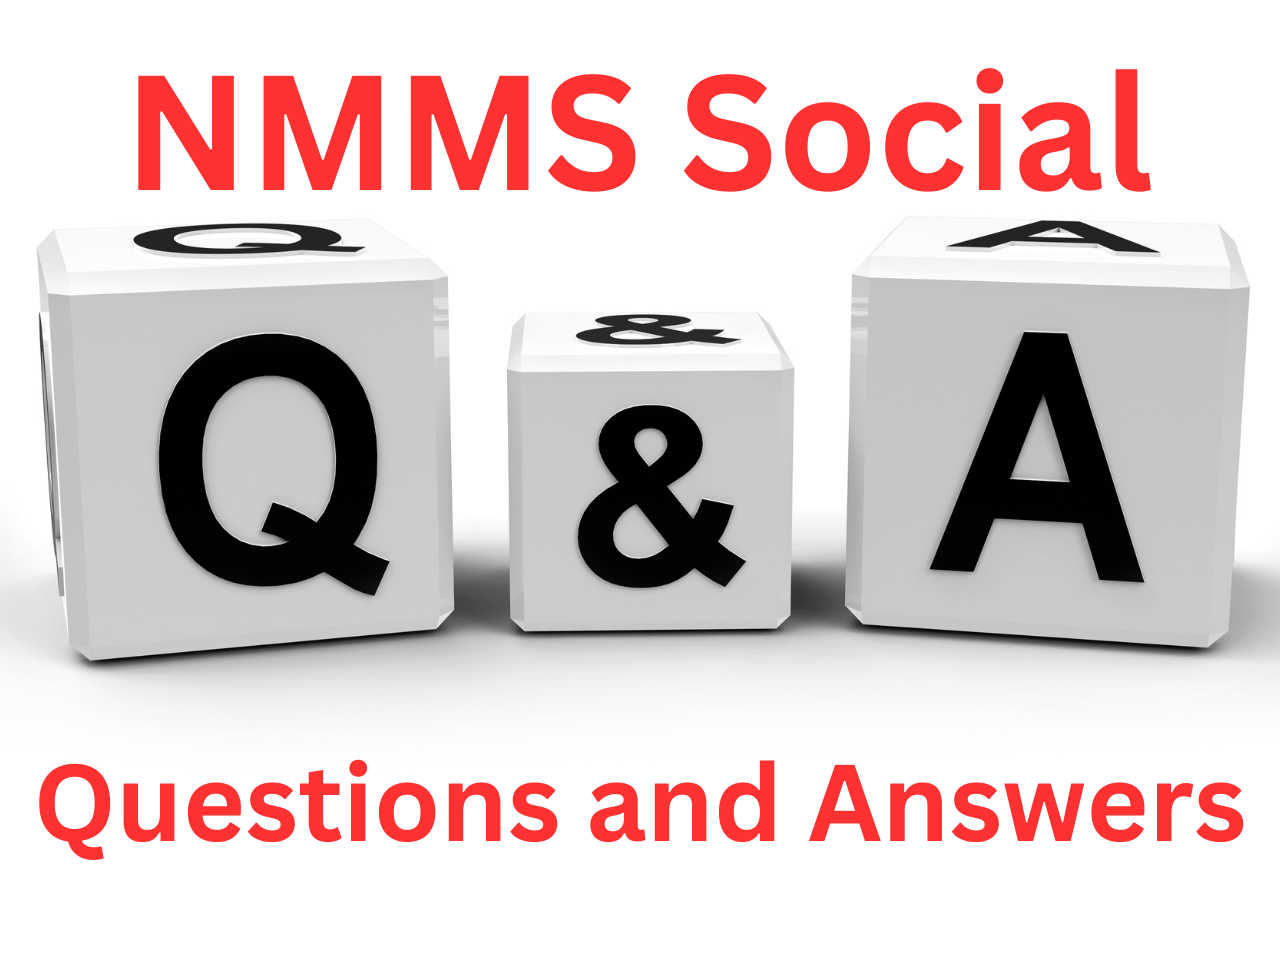 NMMS Social Questions and Answers